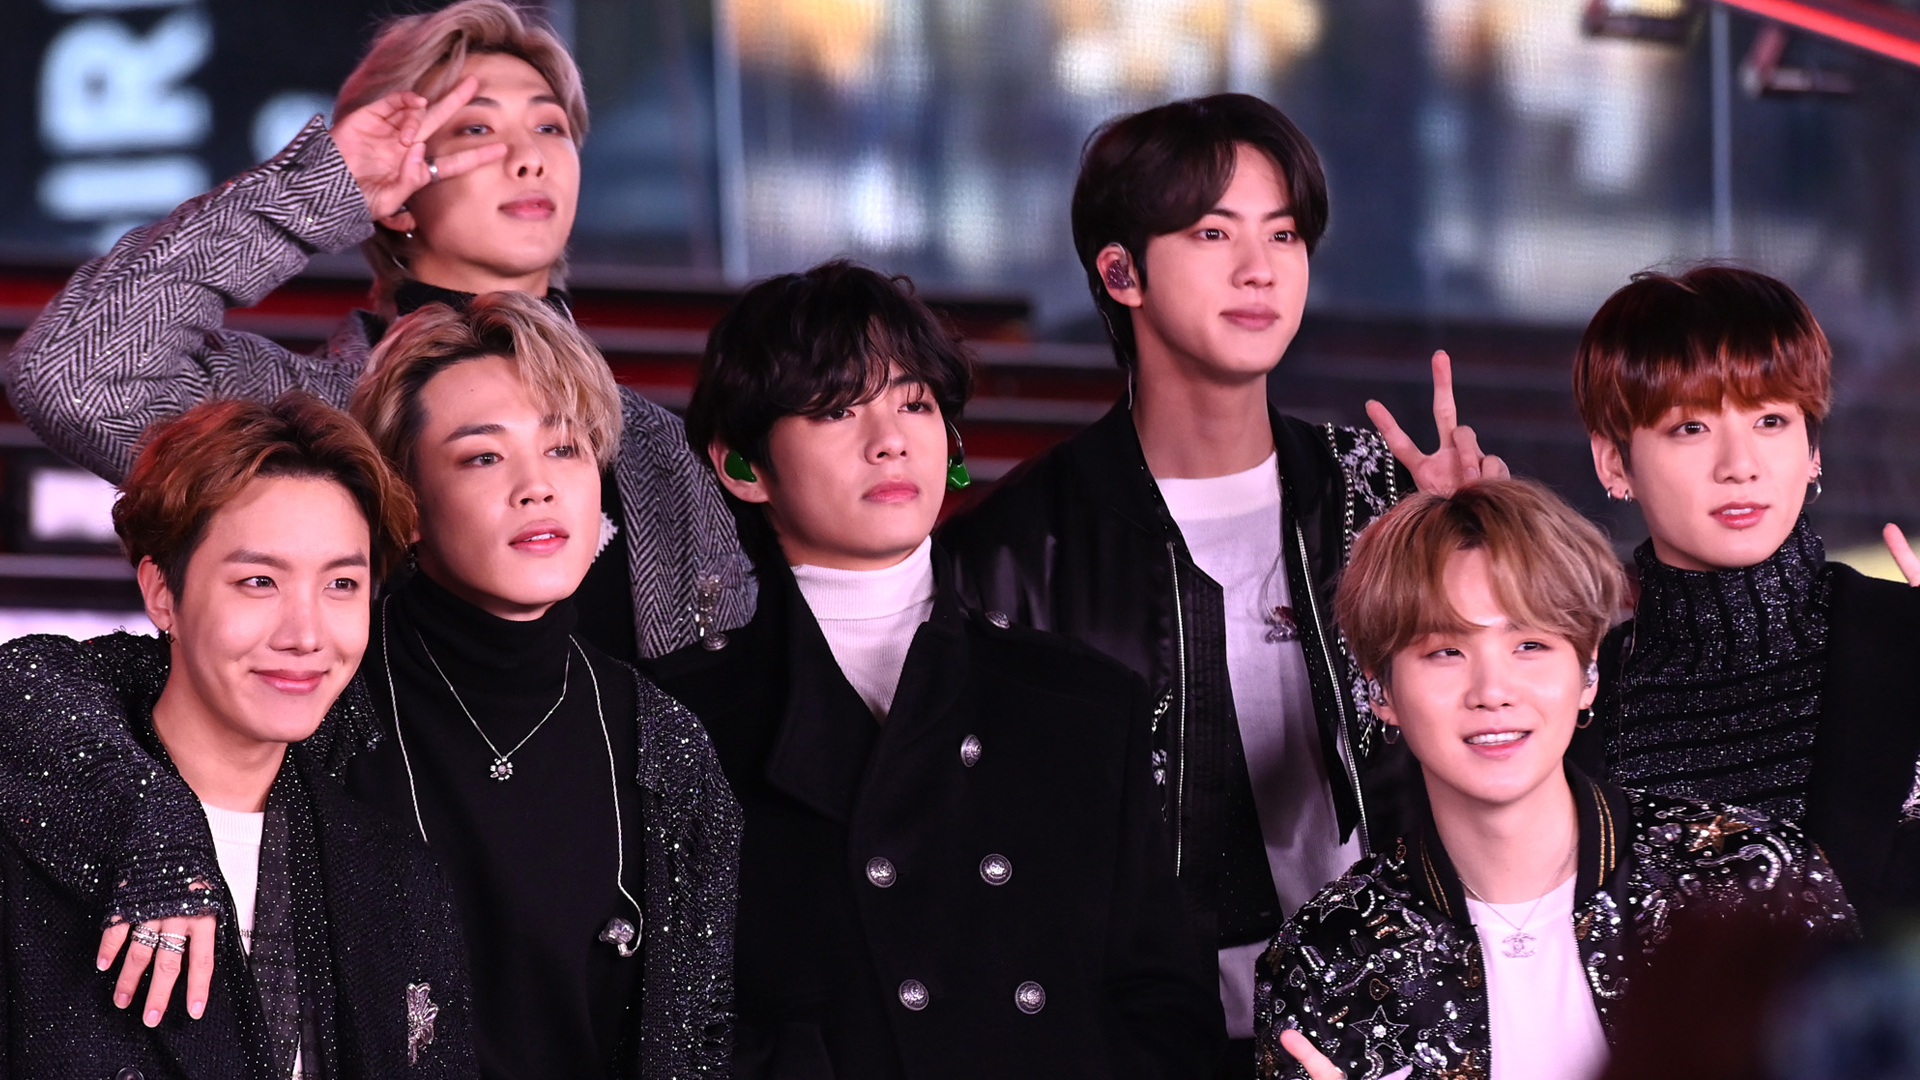 BTS performs during Dick Clark's New Year's Rockin' Eve With Ryan Seacrest 2020 on December 31, 2019 in New York City.